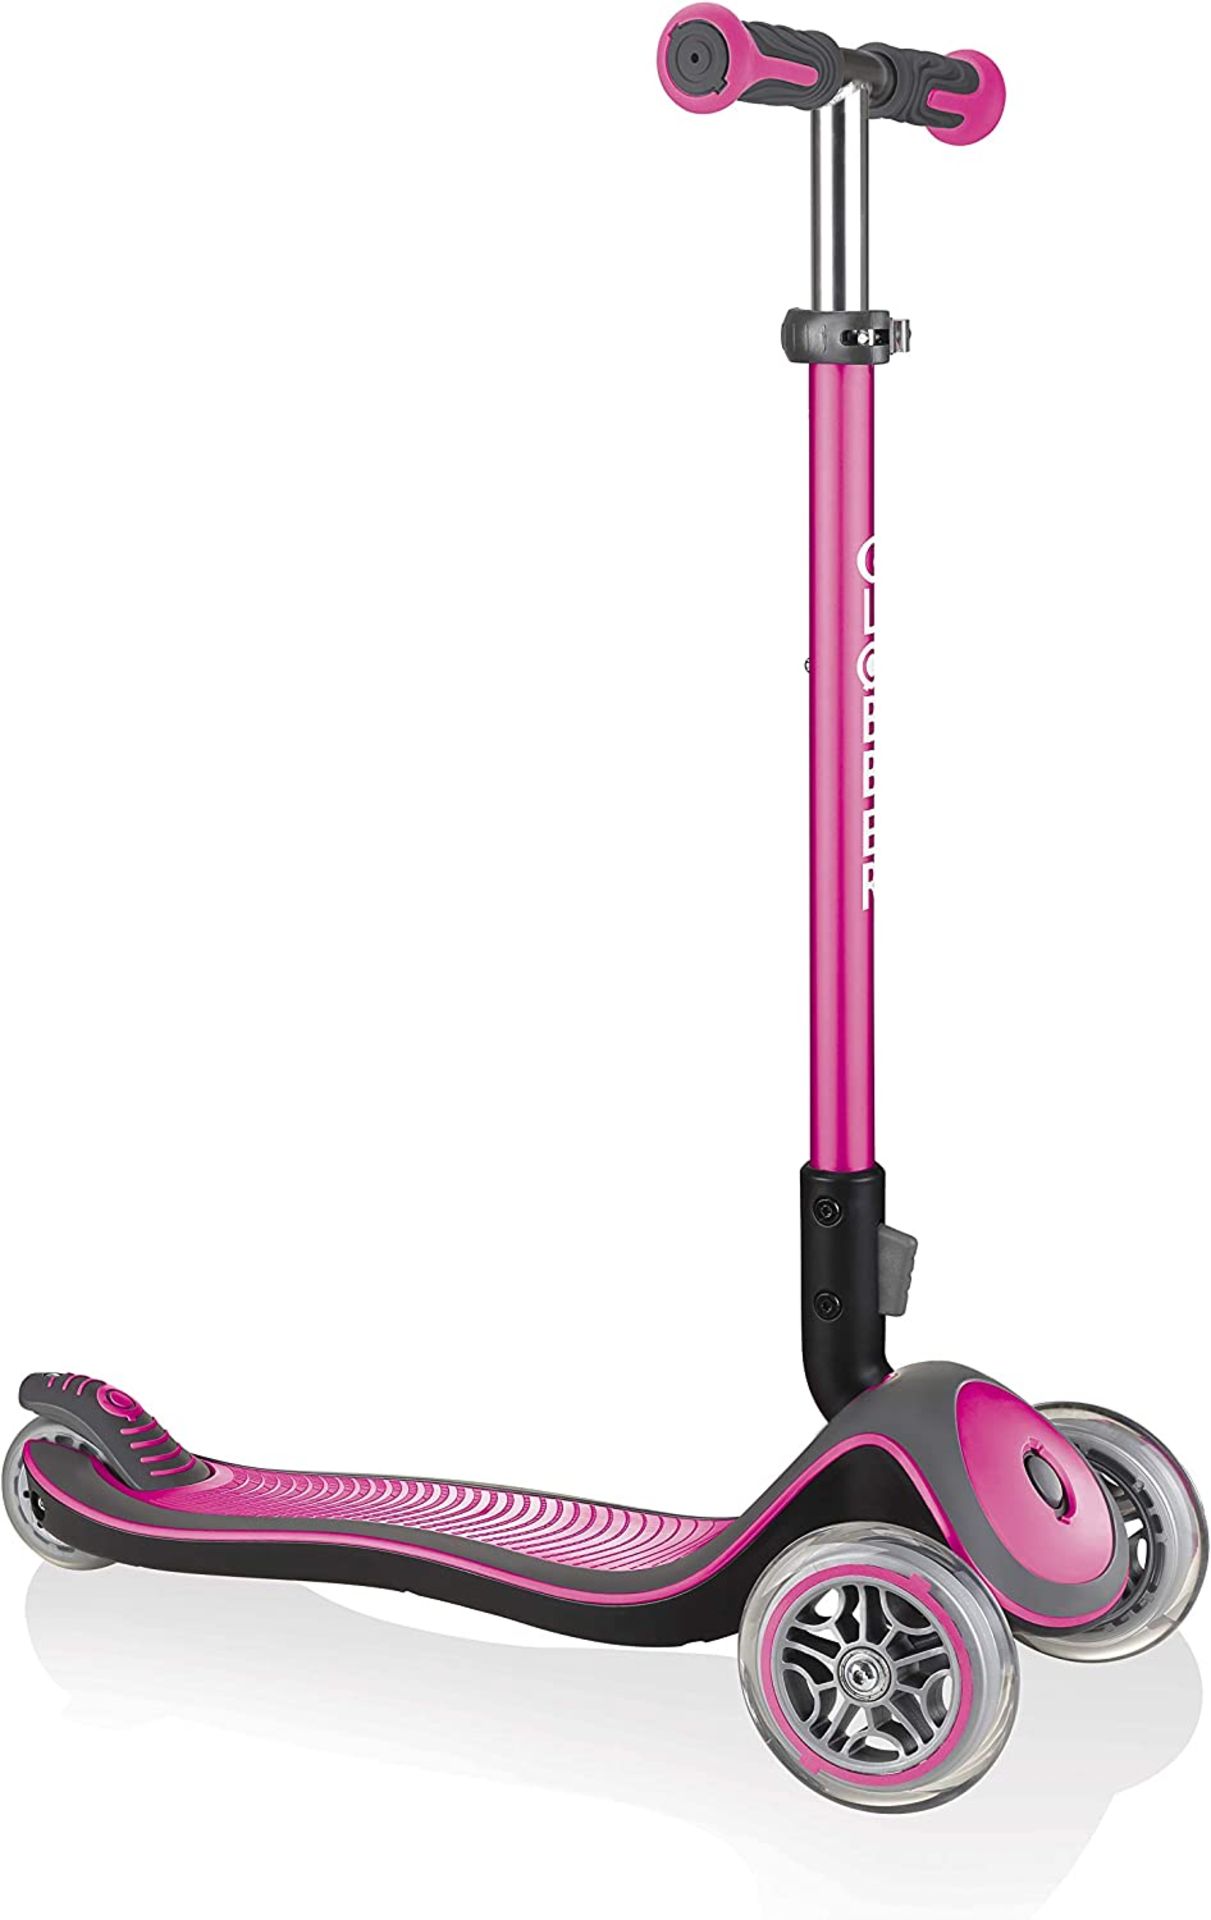 Globber Elite Deluxe. Pink. RRP £125.00. The scooter offers stability for children when learning how